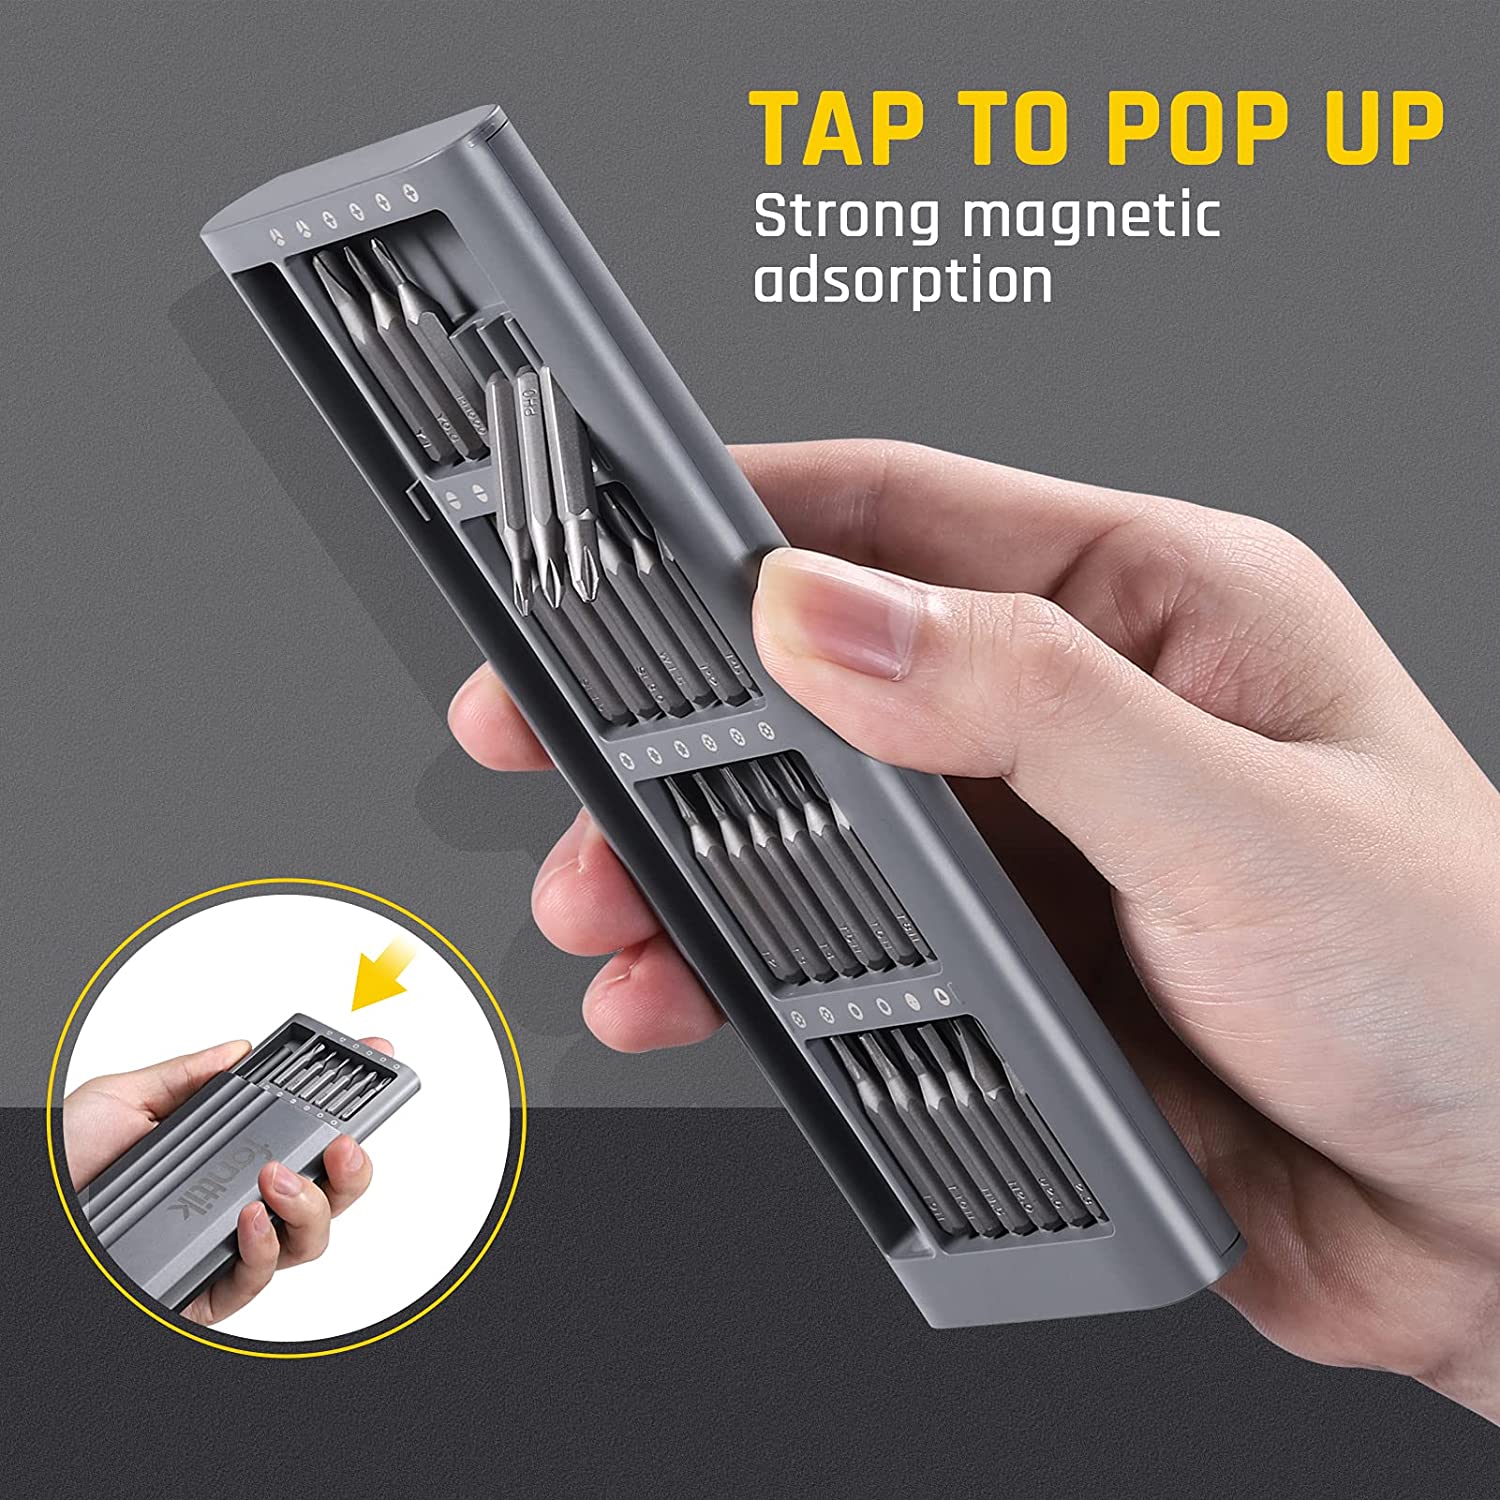 Magnetic box helps hold all the screws in place so that they do not fall off. 